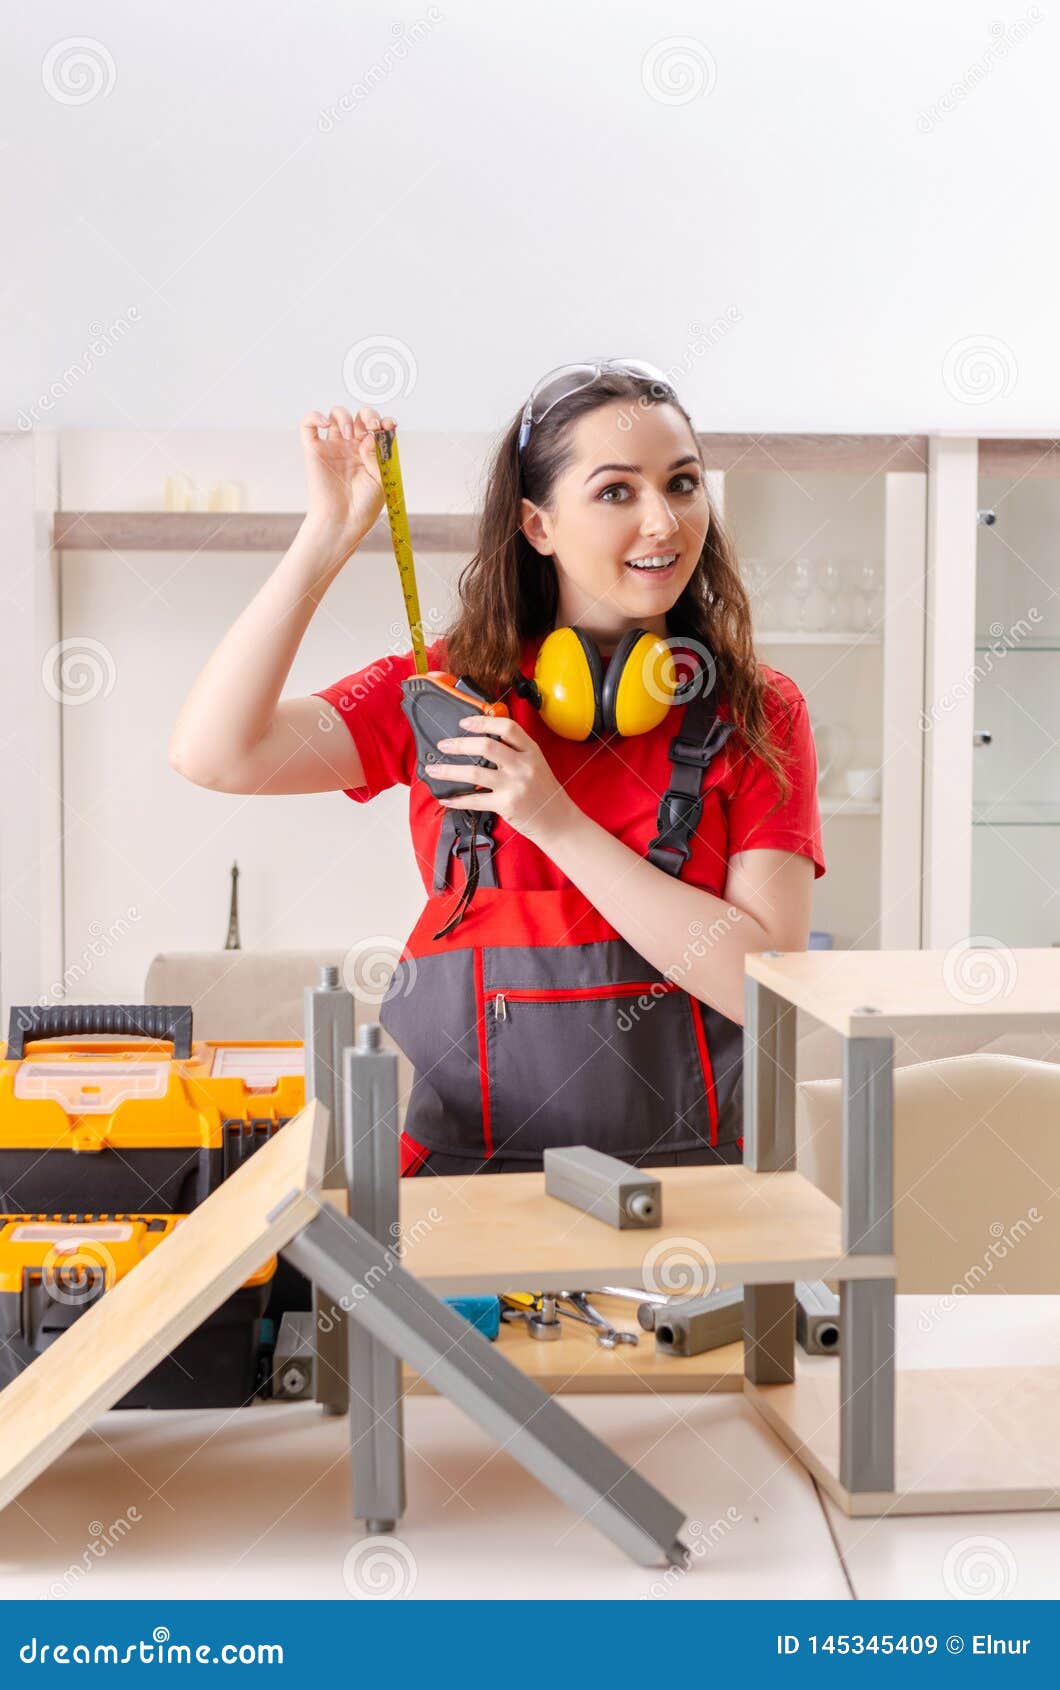 The Female Contractor Repairing Furniture at Home Stock Image - Image ...